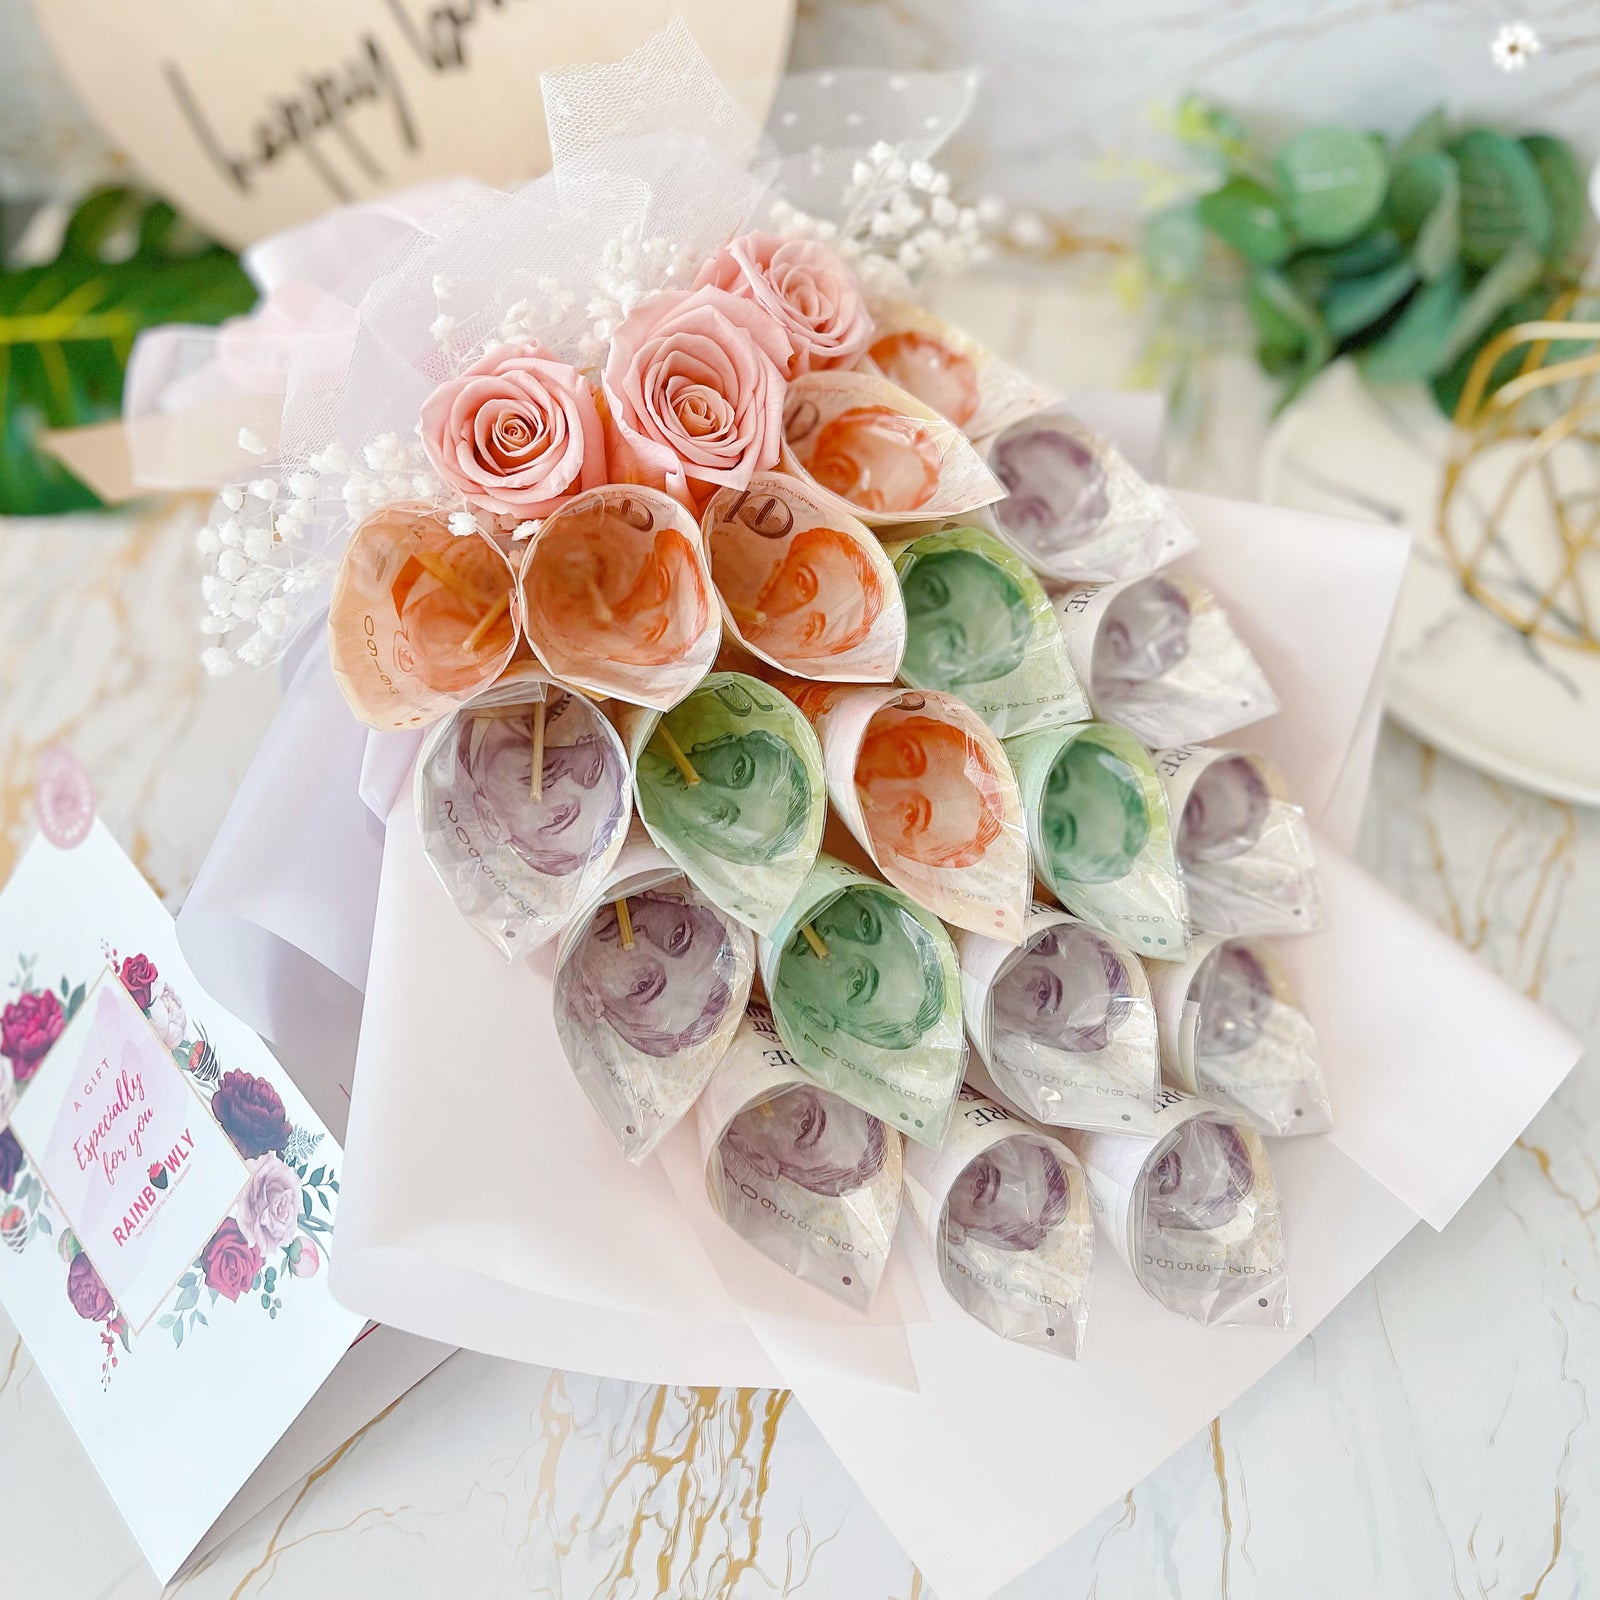 $100 Dollar Thoughts - Luxury Cash Money Bouquet - Rainbowly Fresh Fruit Gift and Flower Arrangments